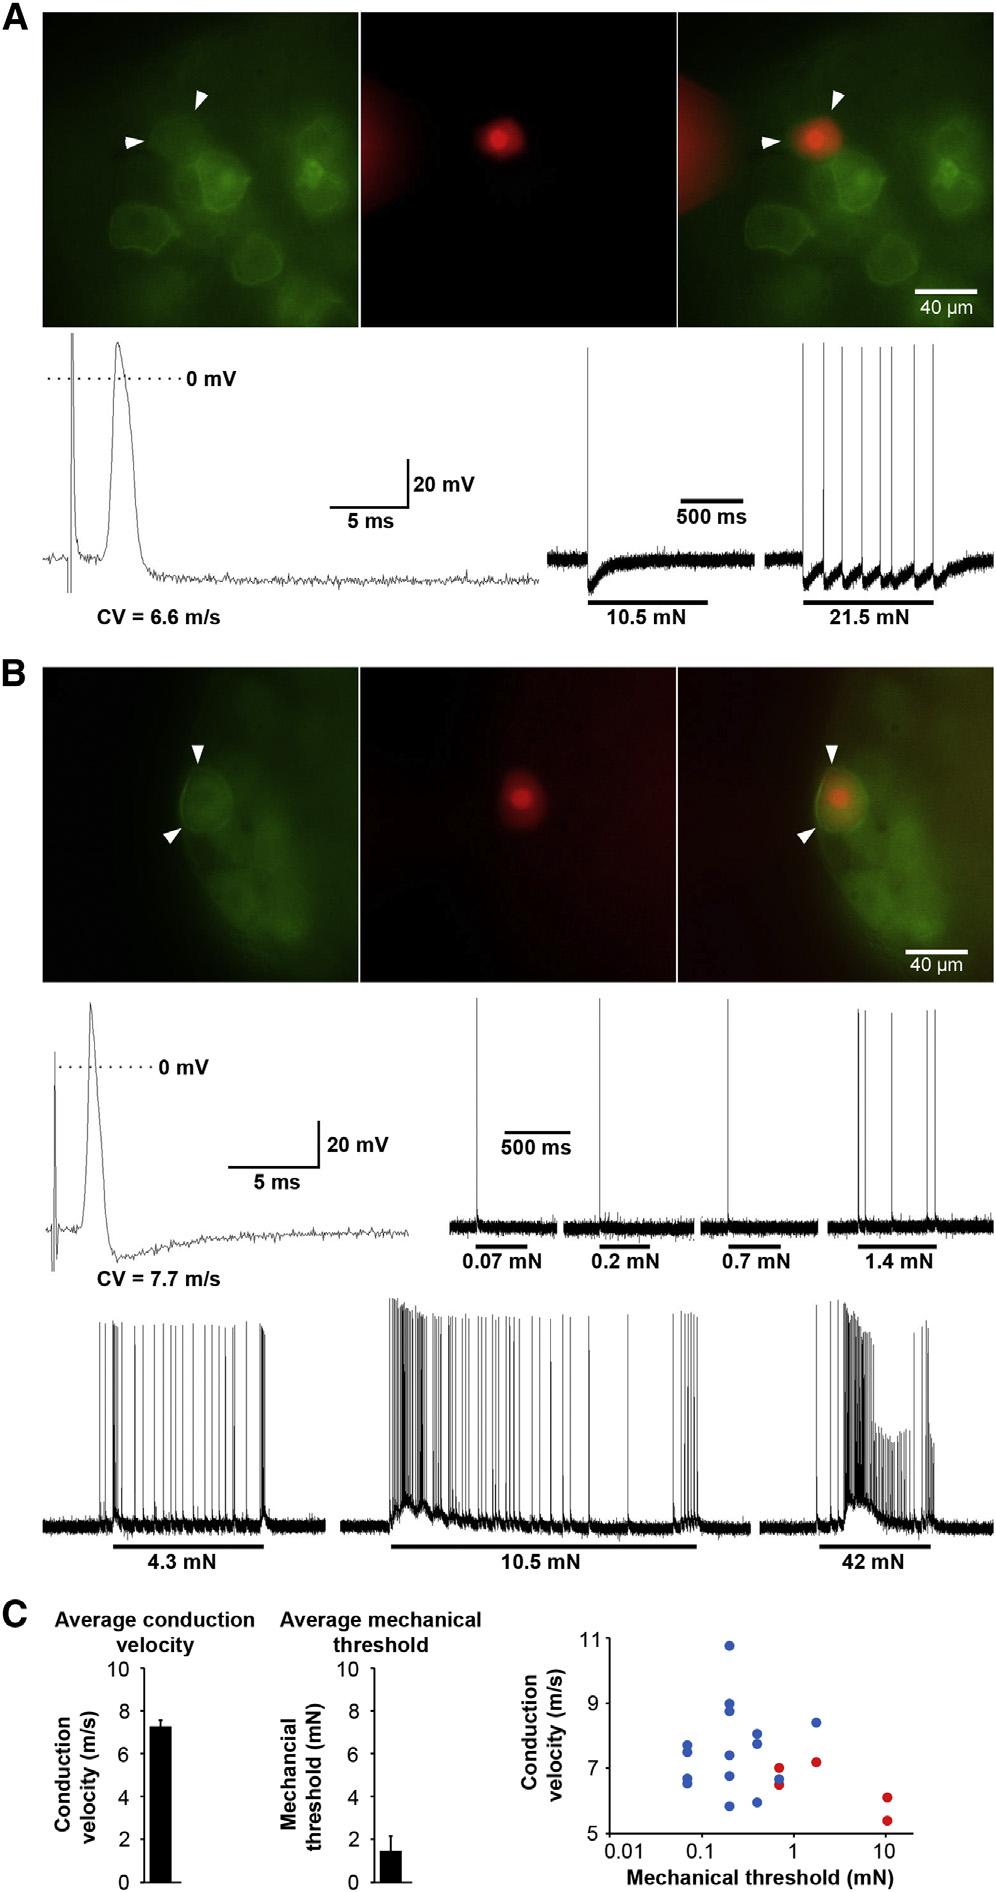 Figure 6. DORGFP-Expressing DRG Neurons Are Mechanosensitive and Include High- and Low-Threshold Ad Mechanonociceptors (A) The conduction velocity (CV, 6.